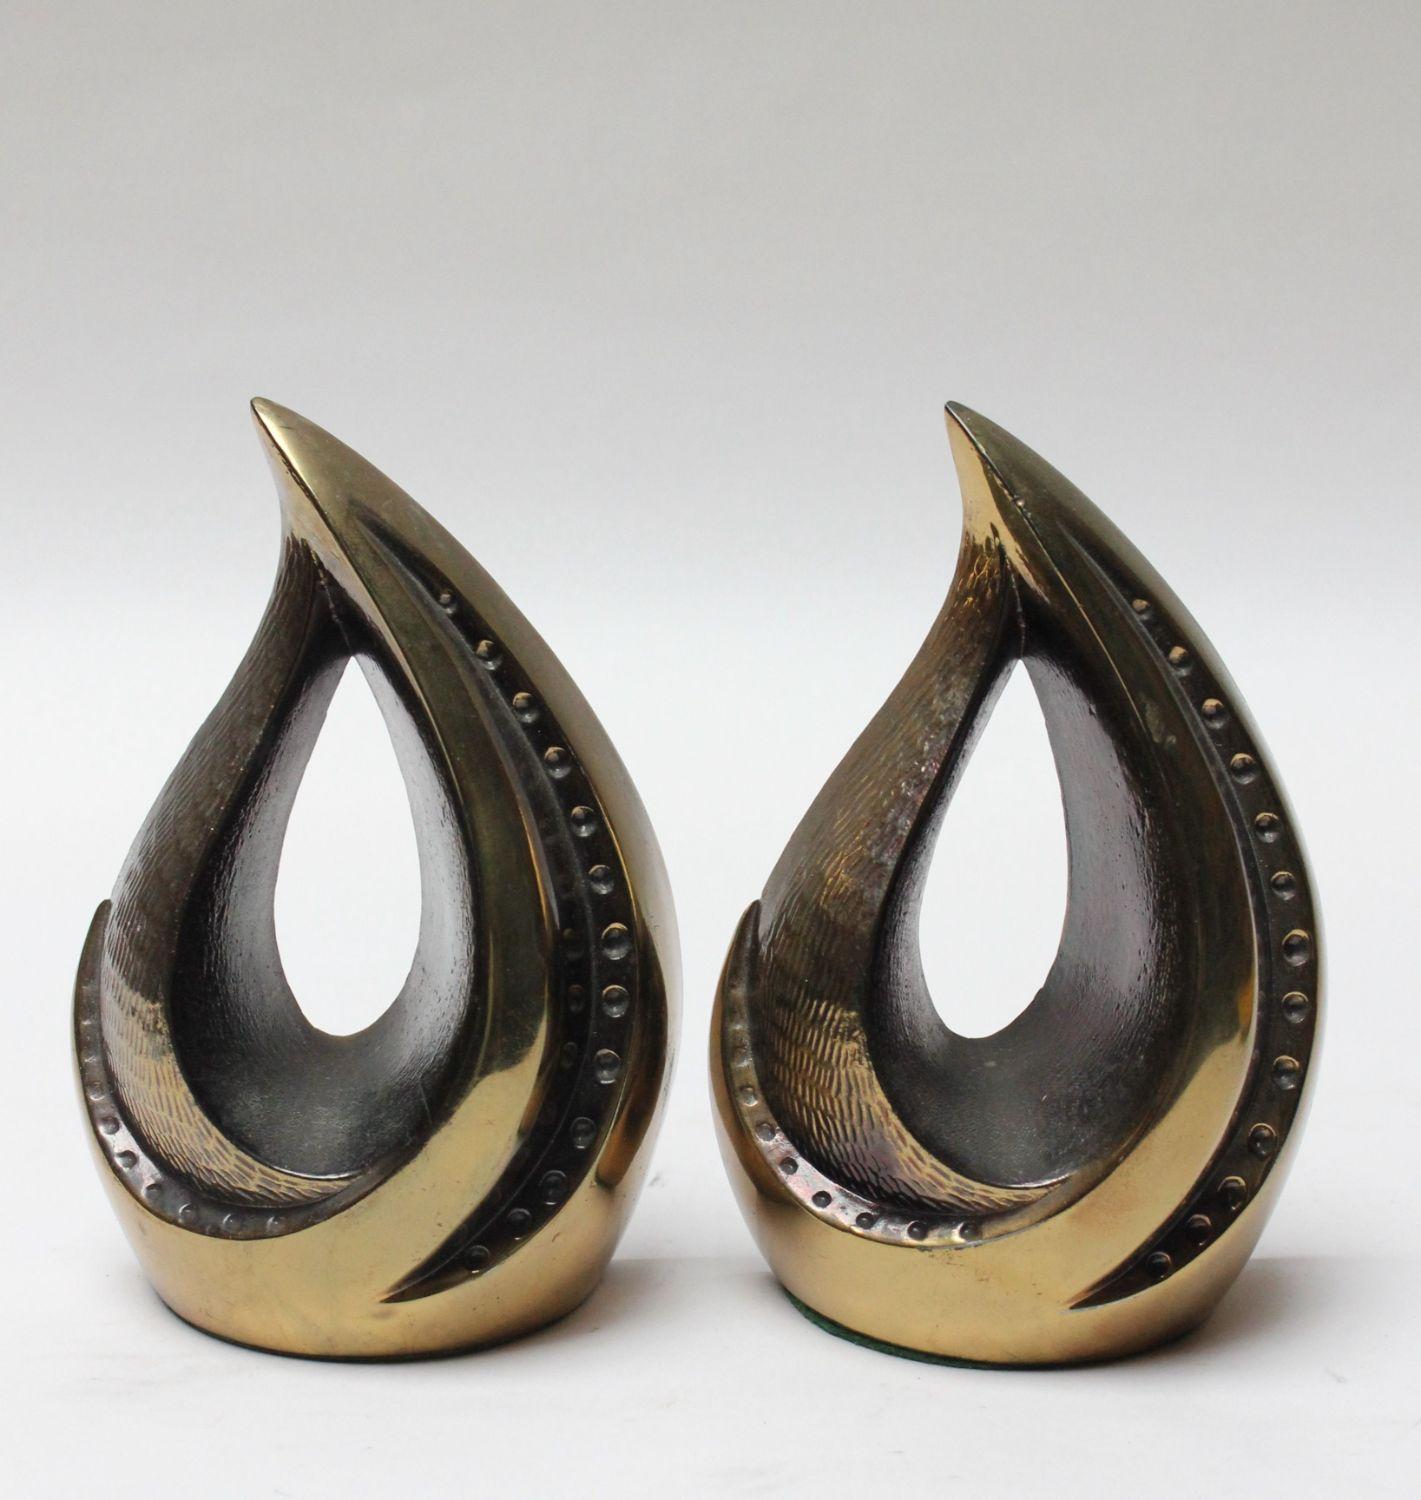 Pair of tear-drop form brass bookends Designed by Ben Seibel for Jenfredware as part of the 